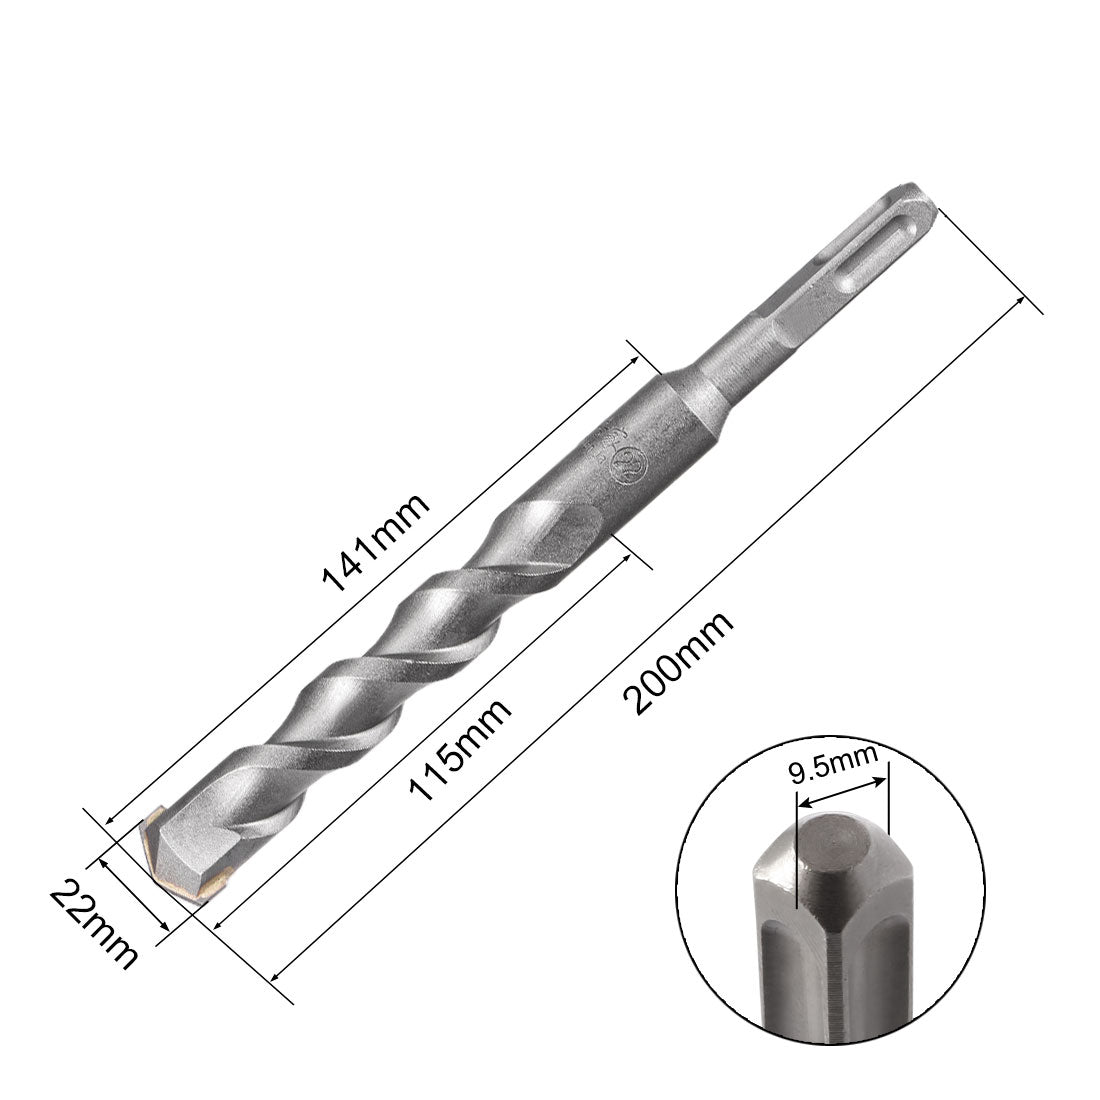 uxcell Uxcell Masonry Drill Bit 22mmx200mm 9.5mm Square Shank for Impact Drill